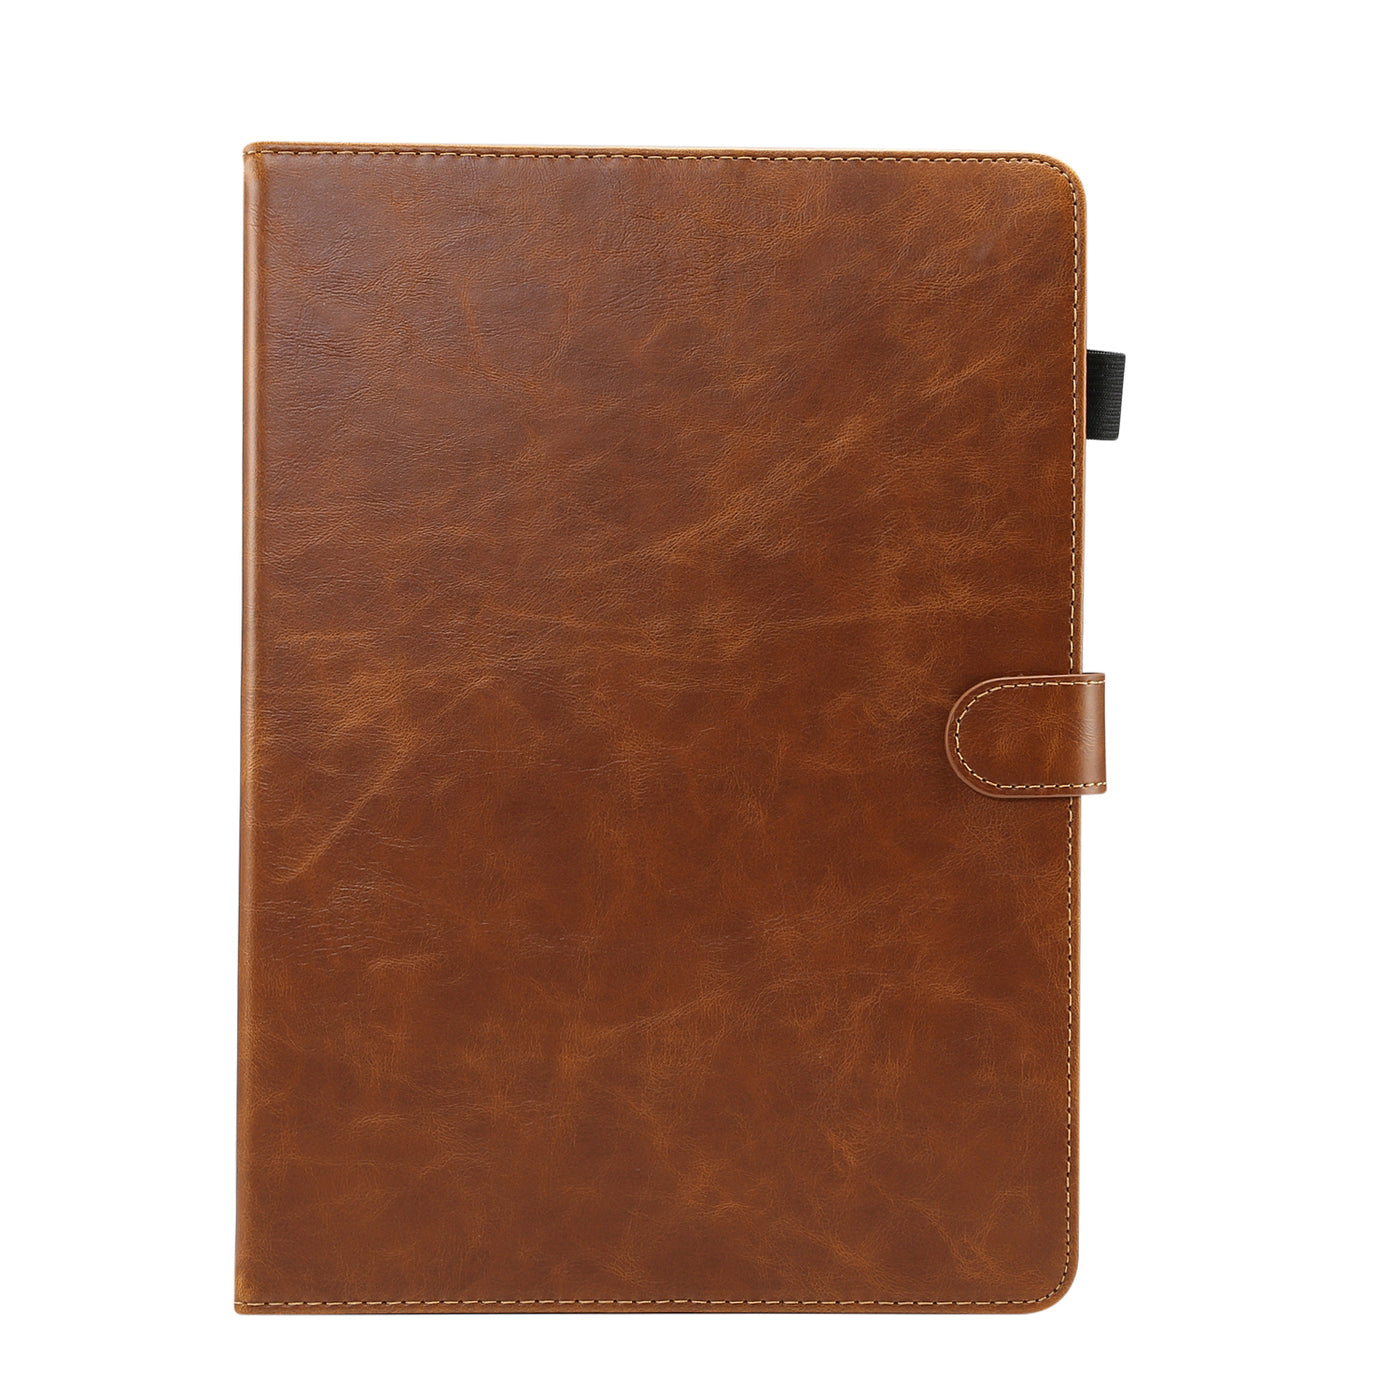 Excelsior Premium Leather Flip Cover Case For Apple iPad Air 10.9 inch (4th Gen)